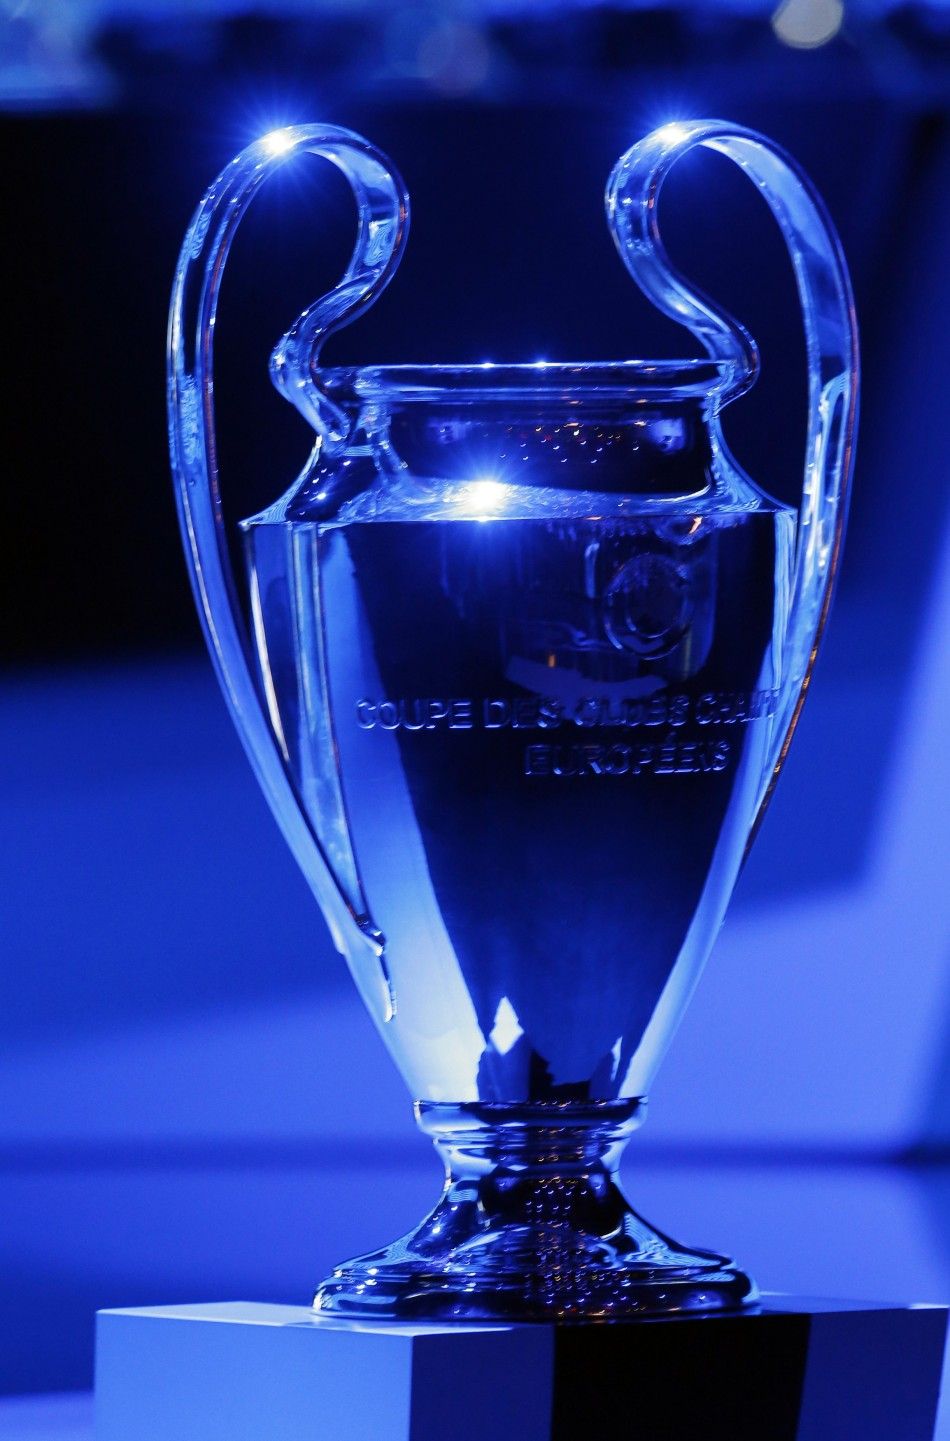 Blue light shines on the Champions league soccer trophy during the draw ceremony for the 20142015 Champions League soccer competition at Monacos Grimaldi Forum in Monte Carlo August 28, 2014. 